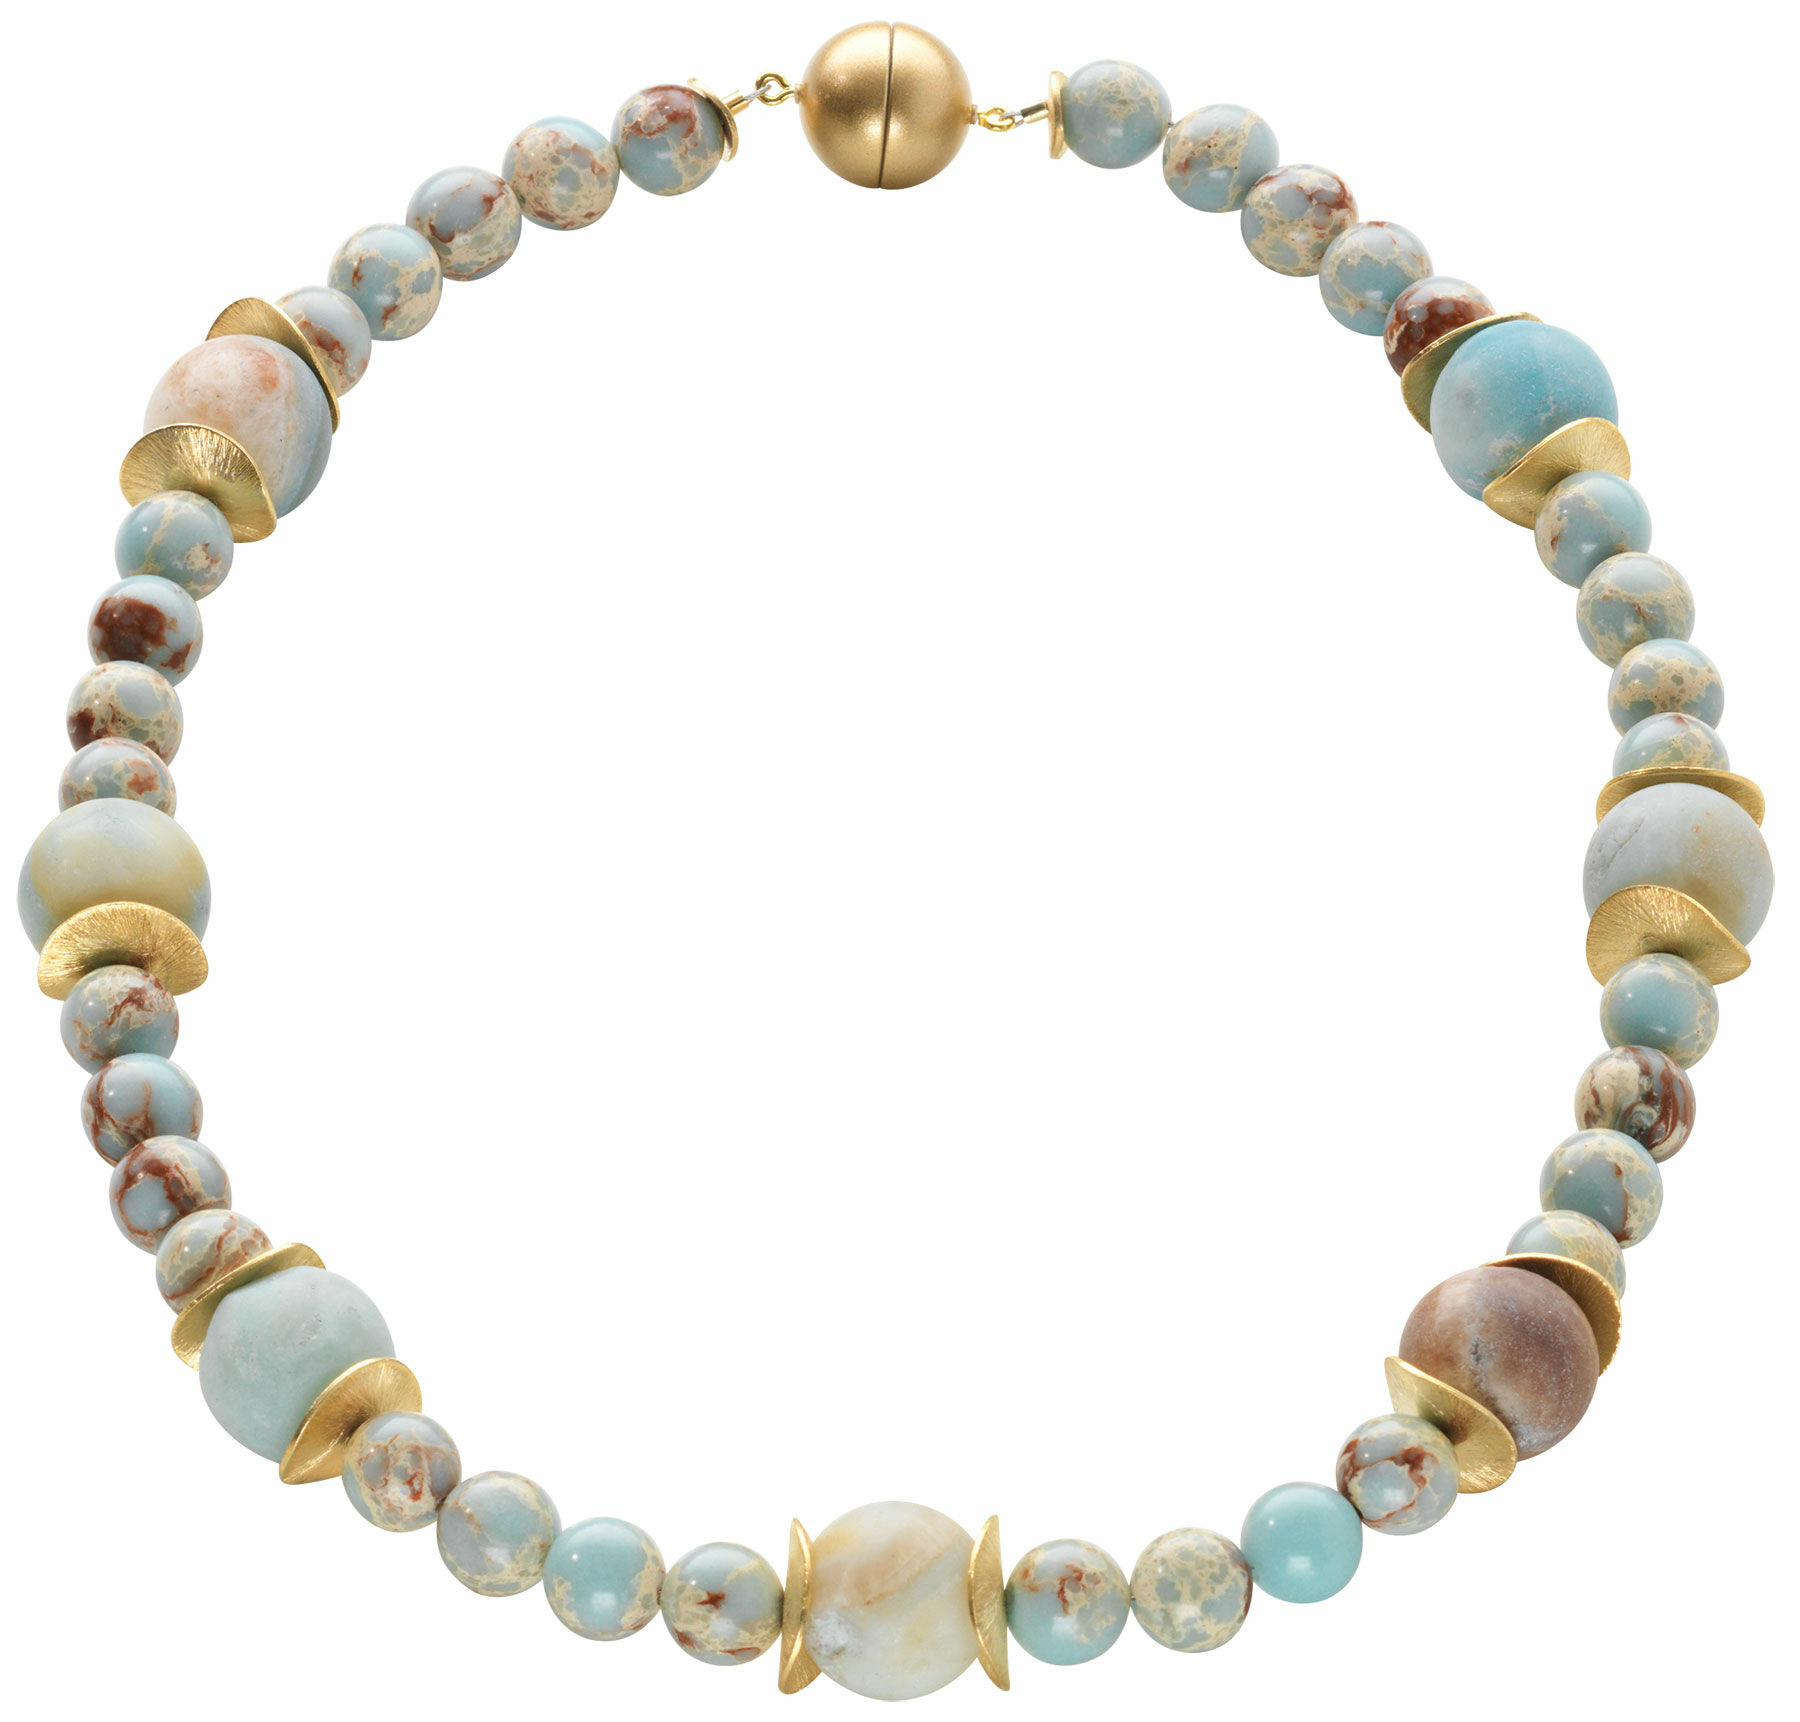 Pearl necklace "Northern Lights"